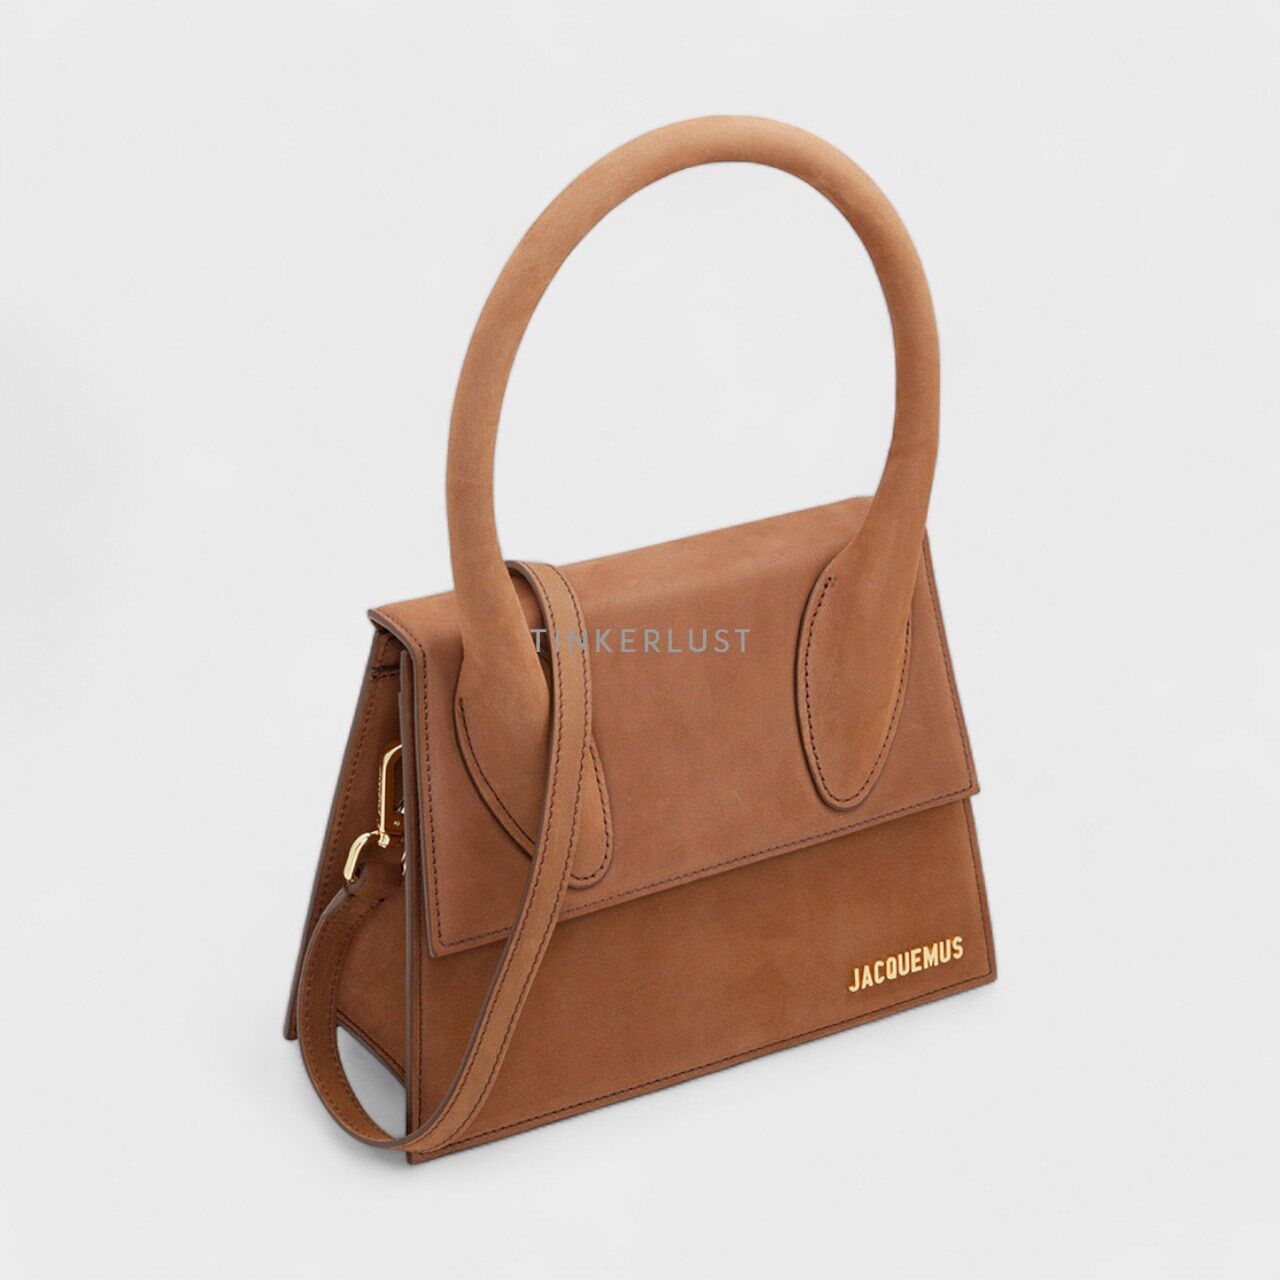 Jacquemus Le Grand Chiquito in Brown Structured Water-Repellent Satchel Bag